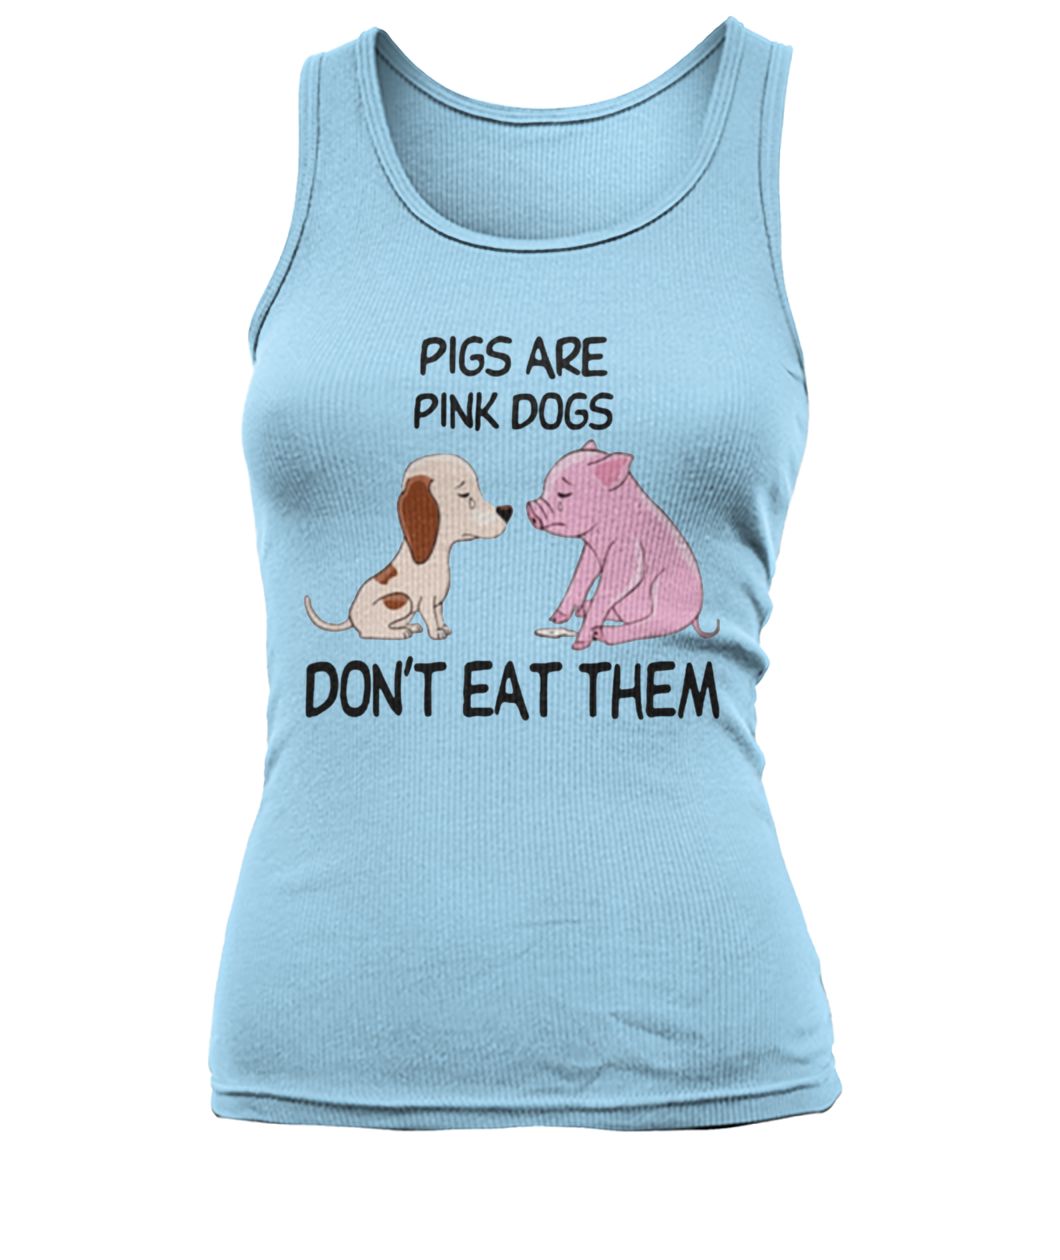 Pigs are pink dogs dont eat them women's tank top